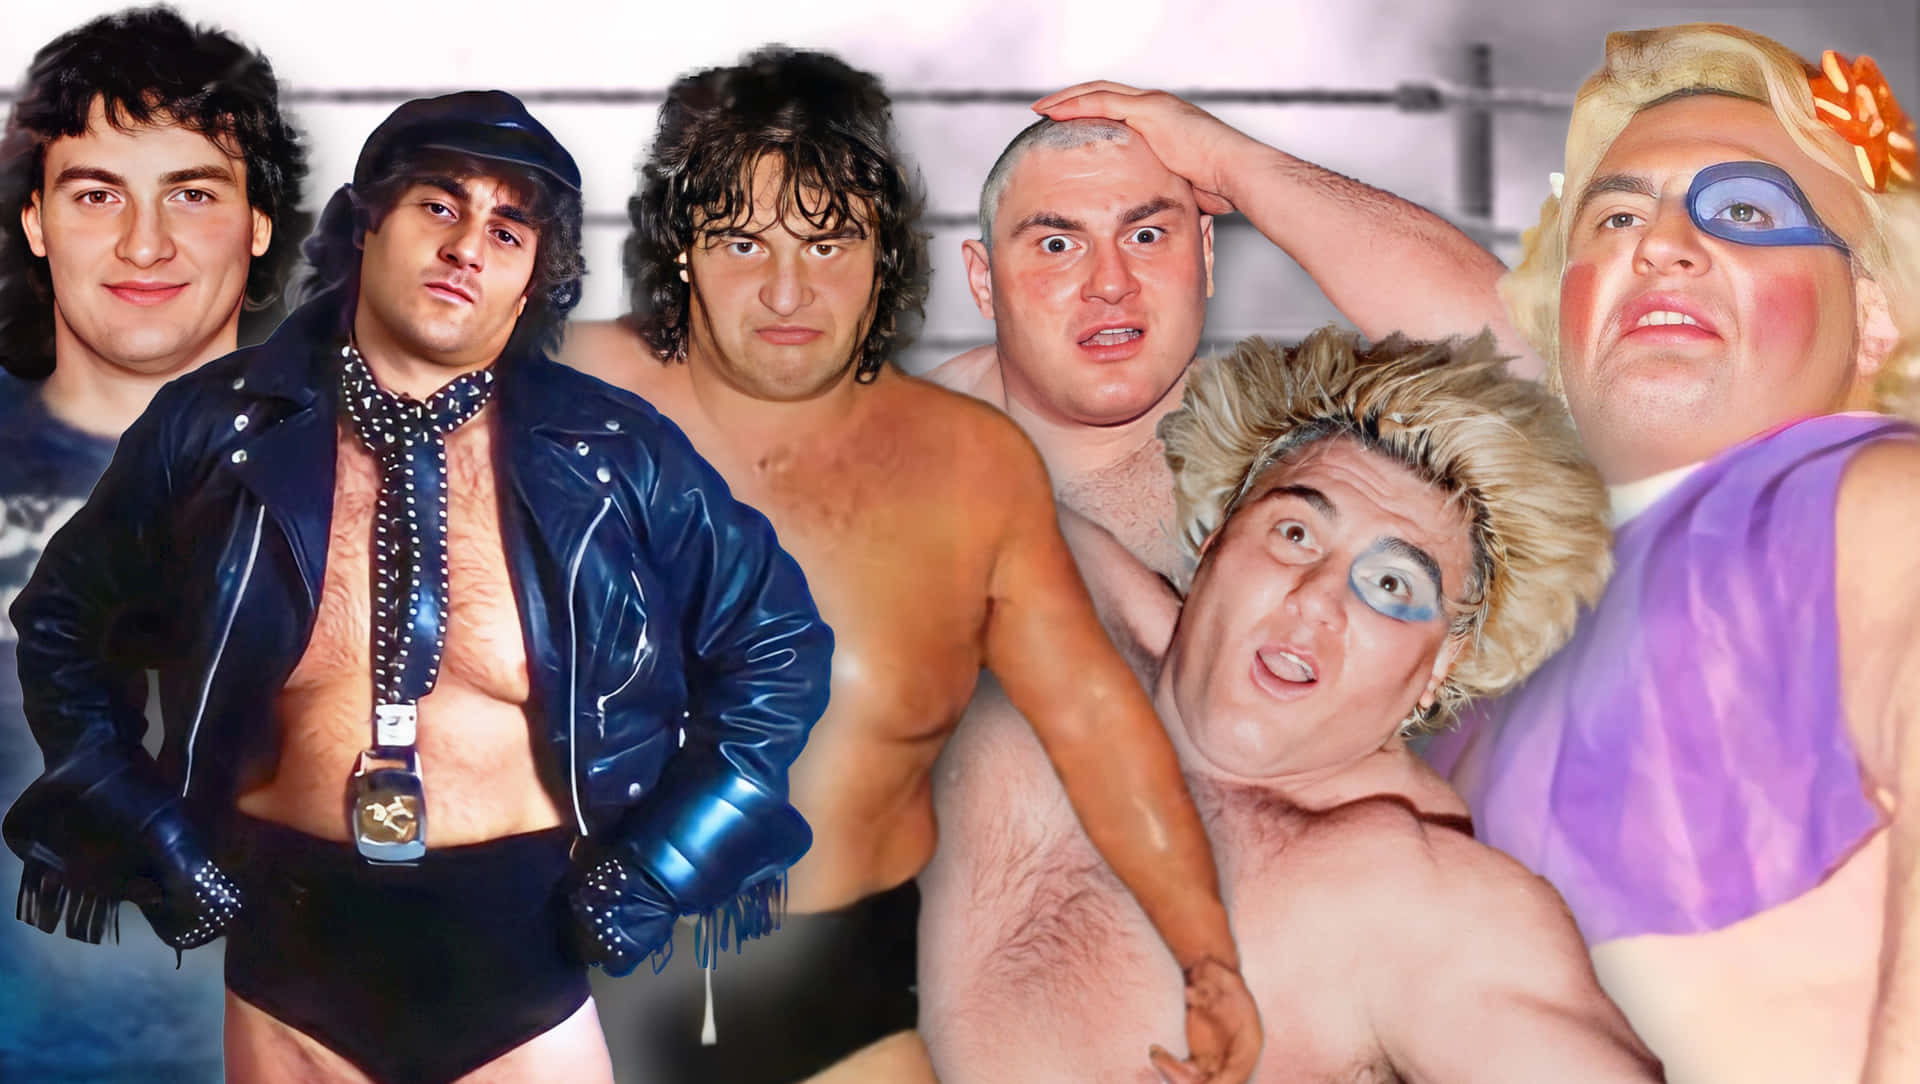 American Professional Wrestler Adrian Adonis Characters And Personas Wallpaper